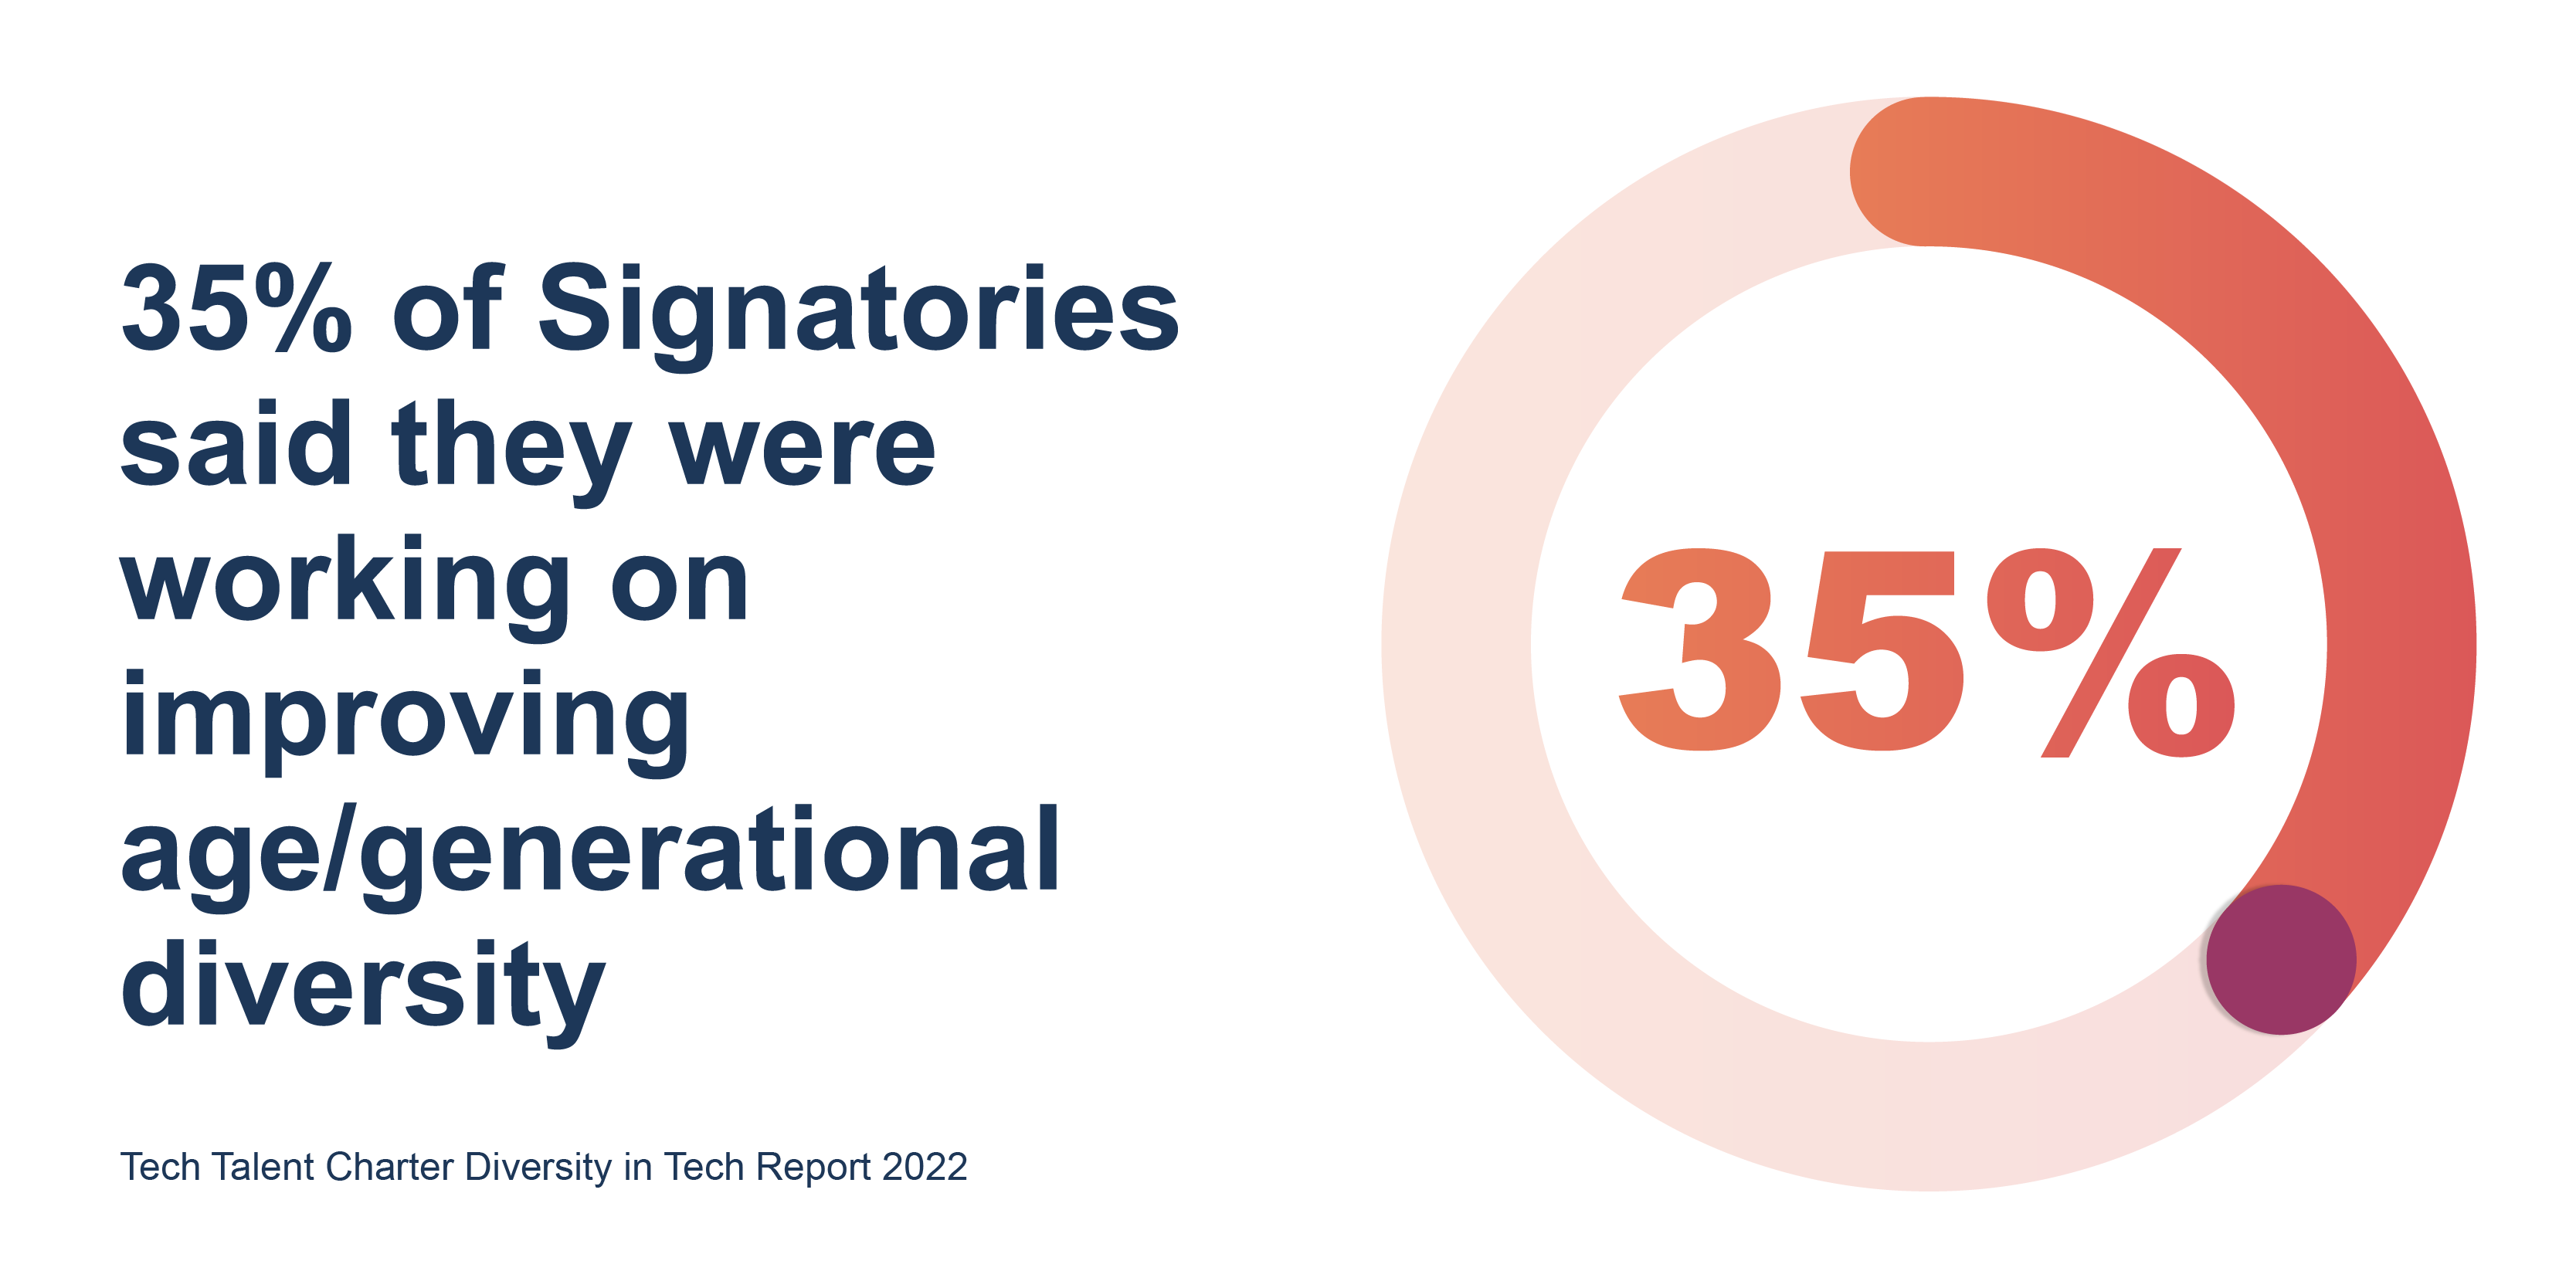 35% of Signatories said they were working on improving age/generational diversity